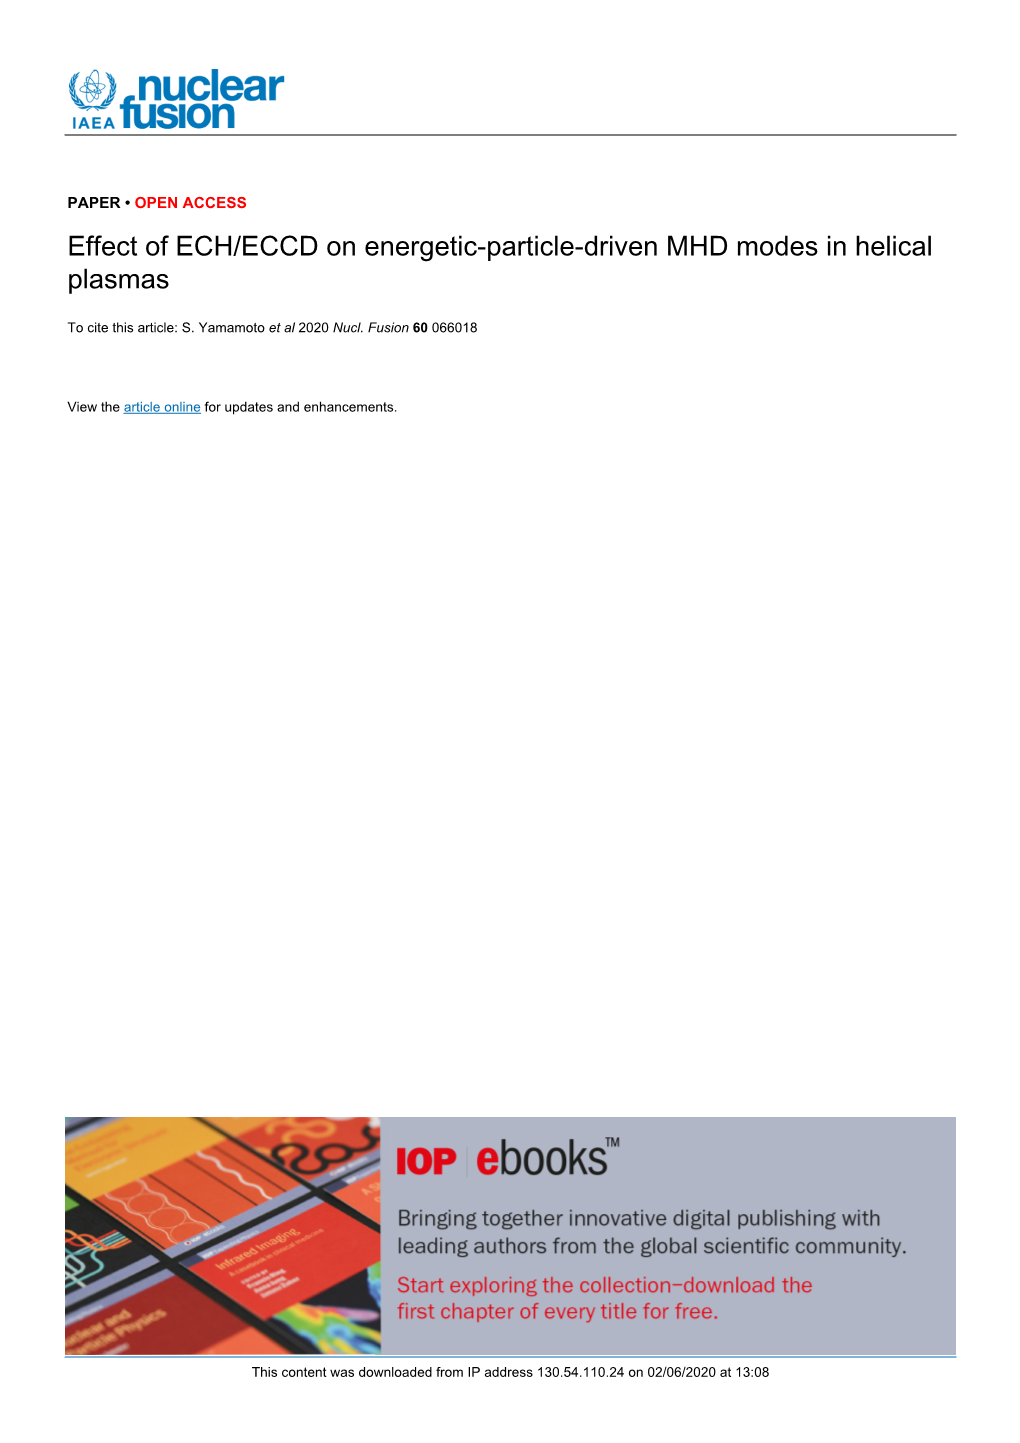 Effect of ECH/ECCD on Energetic-Particle-Driven MHD Modes in Helical Plasmas